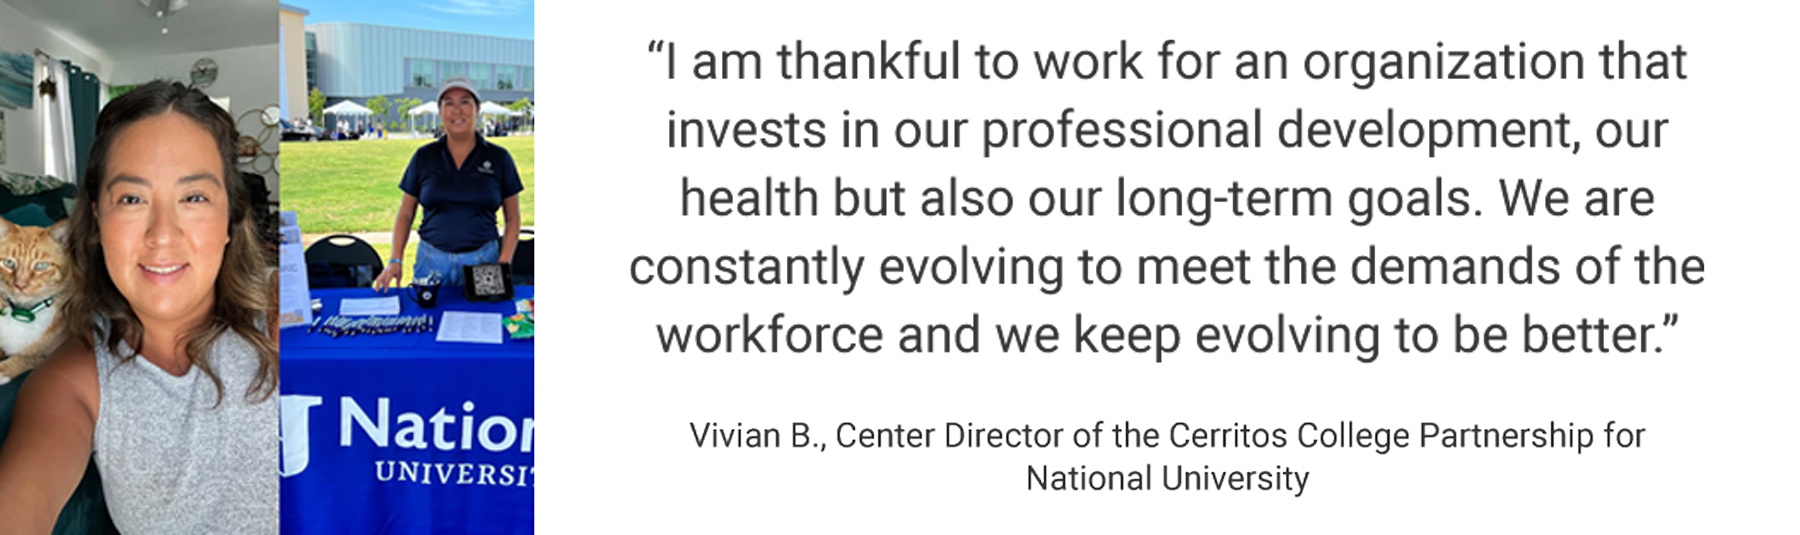 Employee Testimonial, "I am thankful to work for an organization that invests in our professional development, our health but also our long-term goals. We are constantly evolving to meet the demands of the workforce and we keep evolving to be better." Vivian B. - Center Director of the Cerritos College Partnership for National University